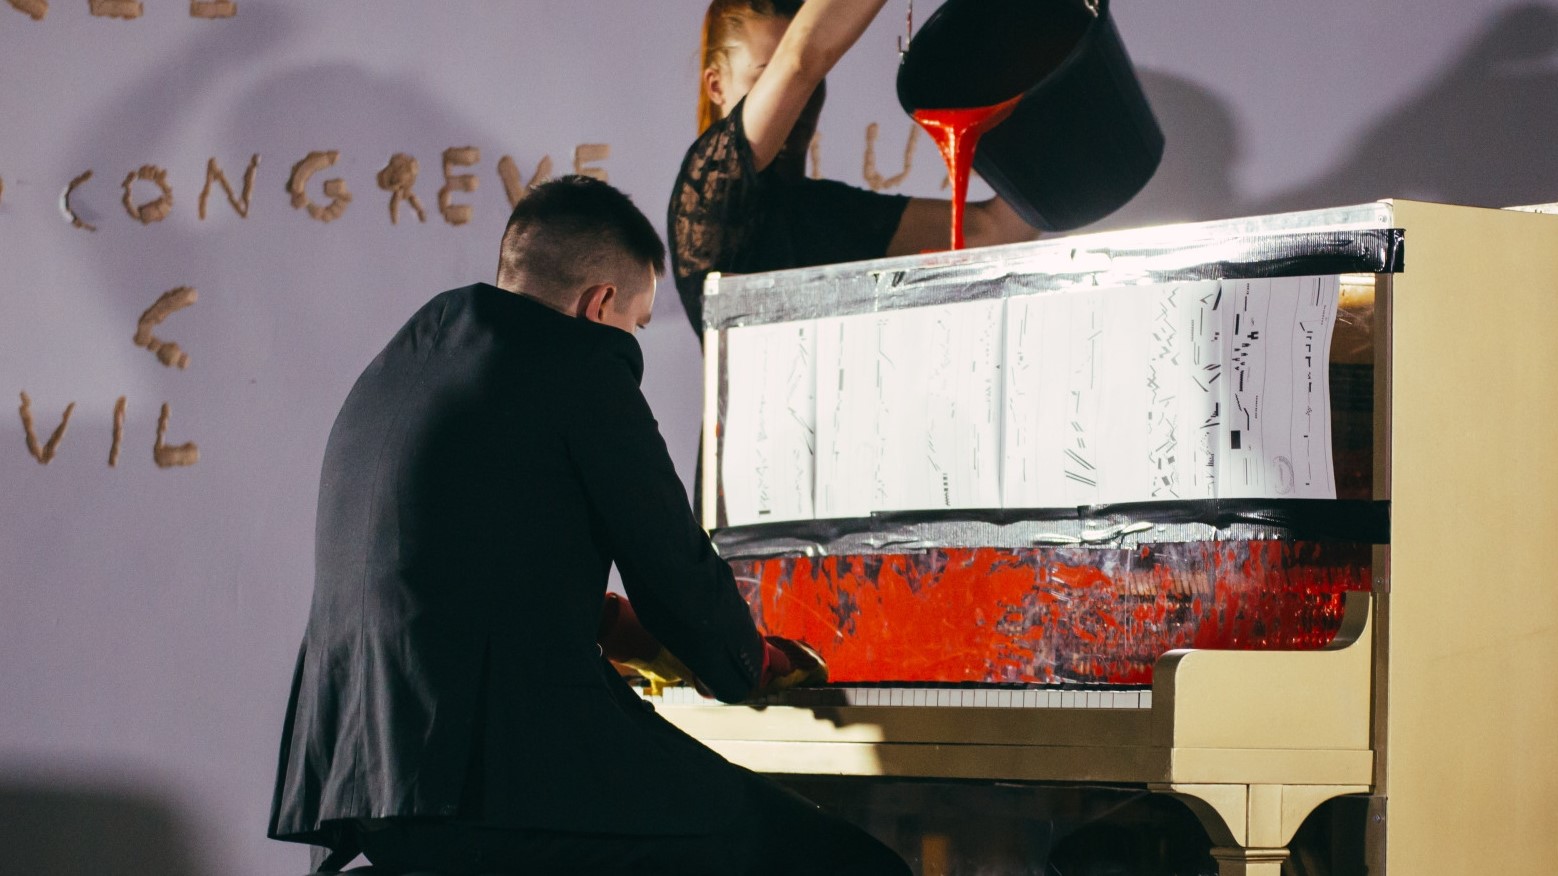 Andy Ingamells plays on a scruffy piano, while another person pours a bucket of red paint into its  workings.